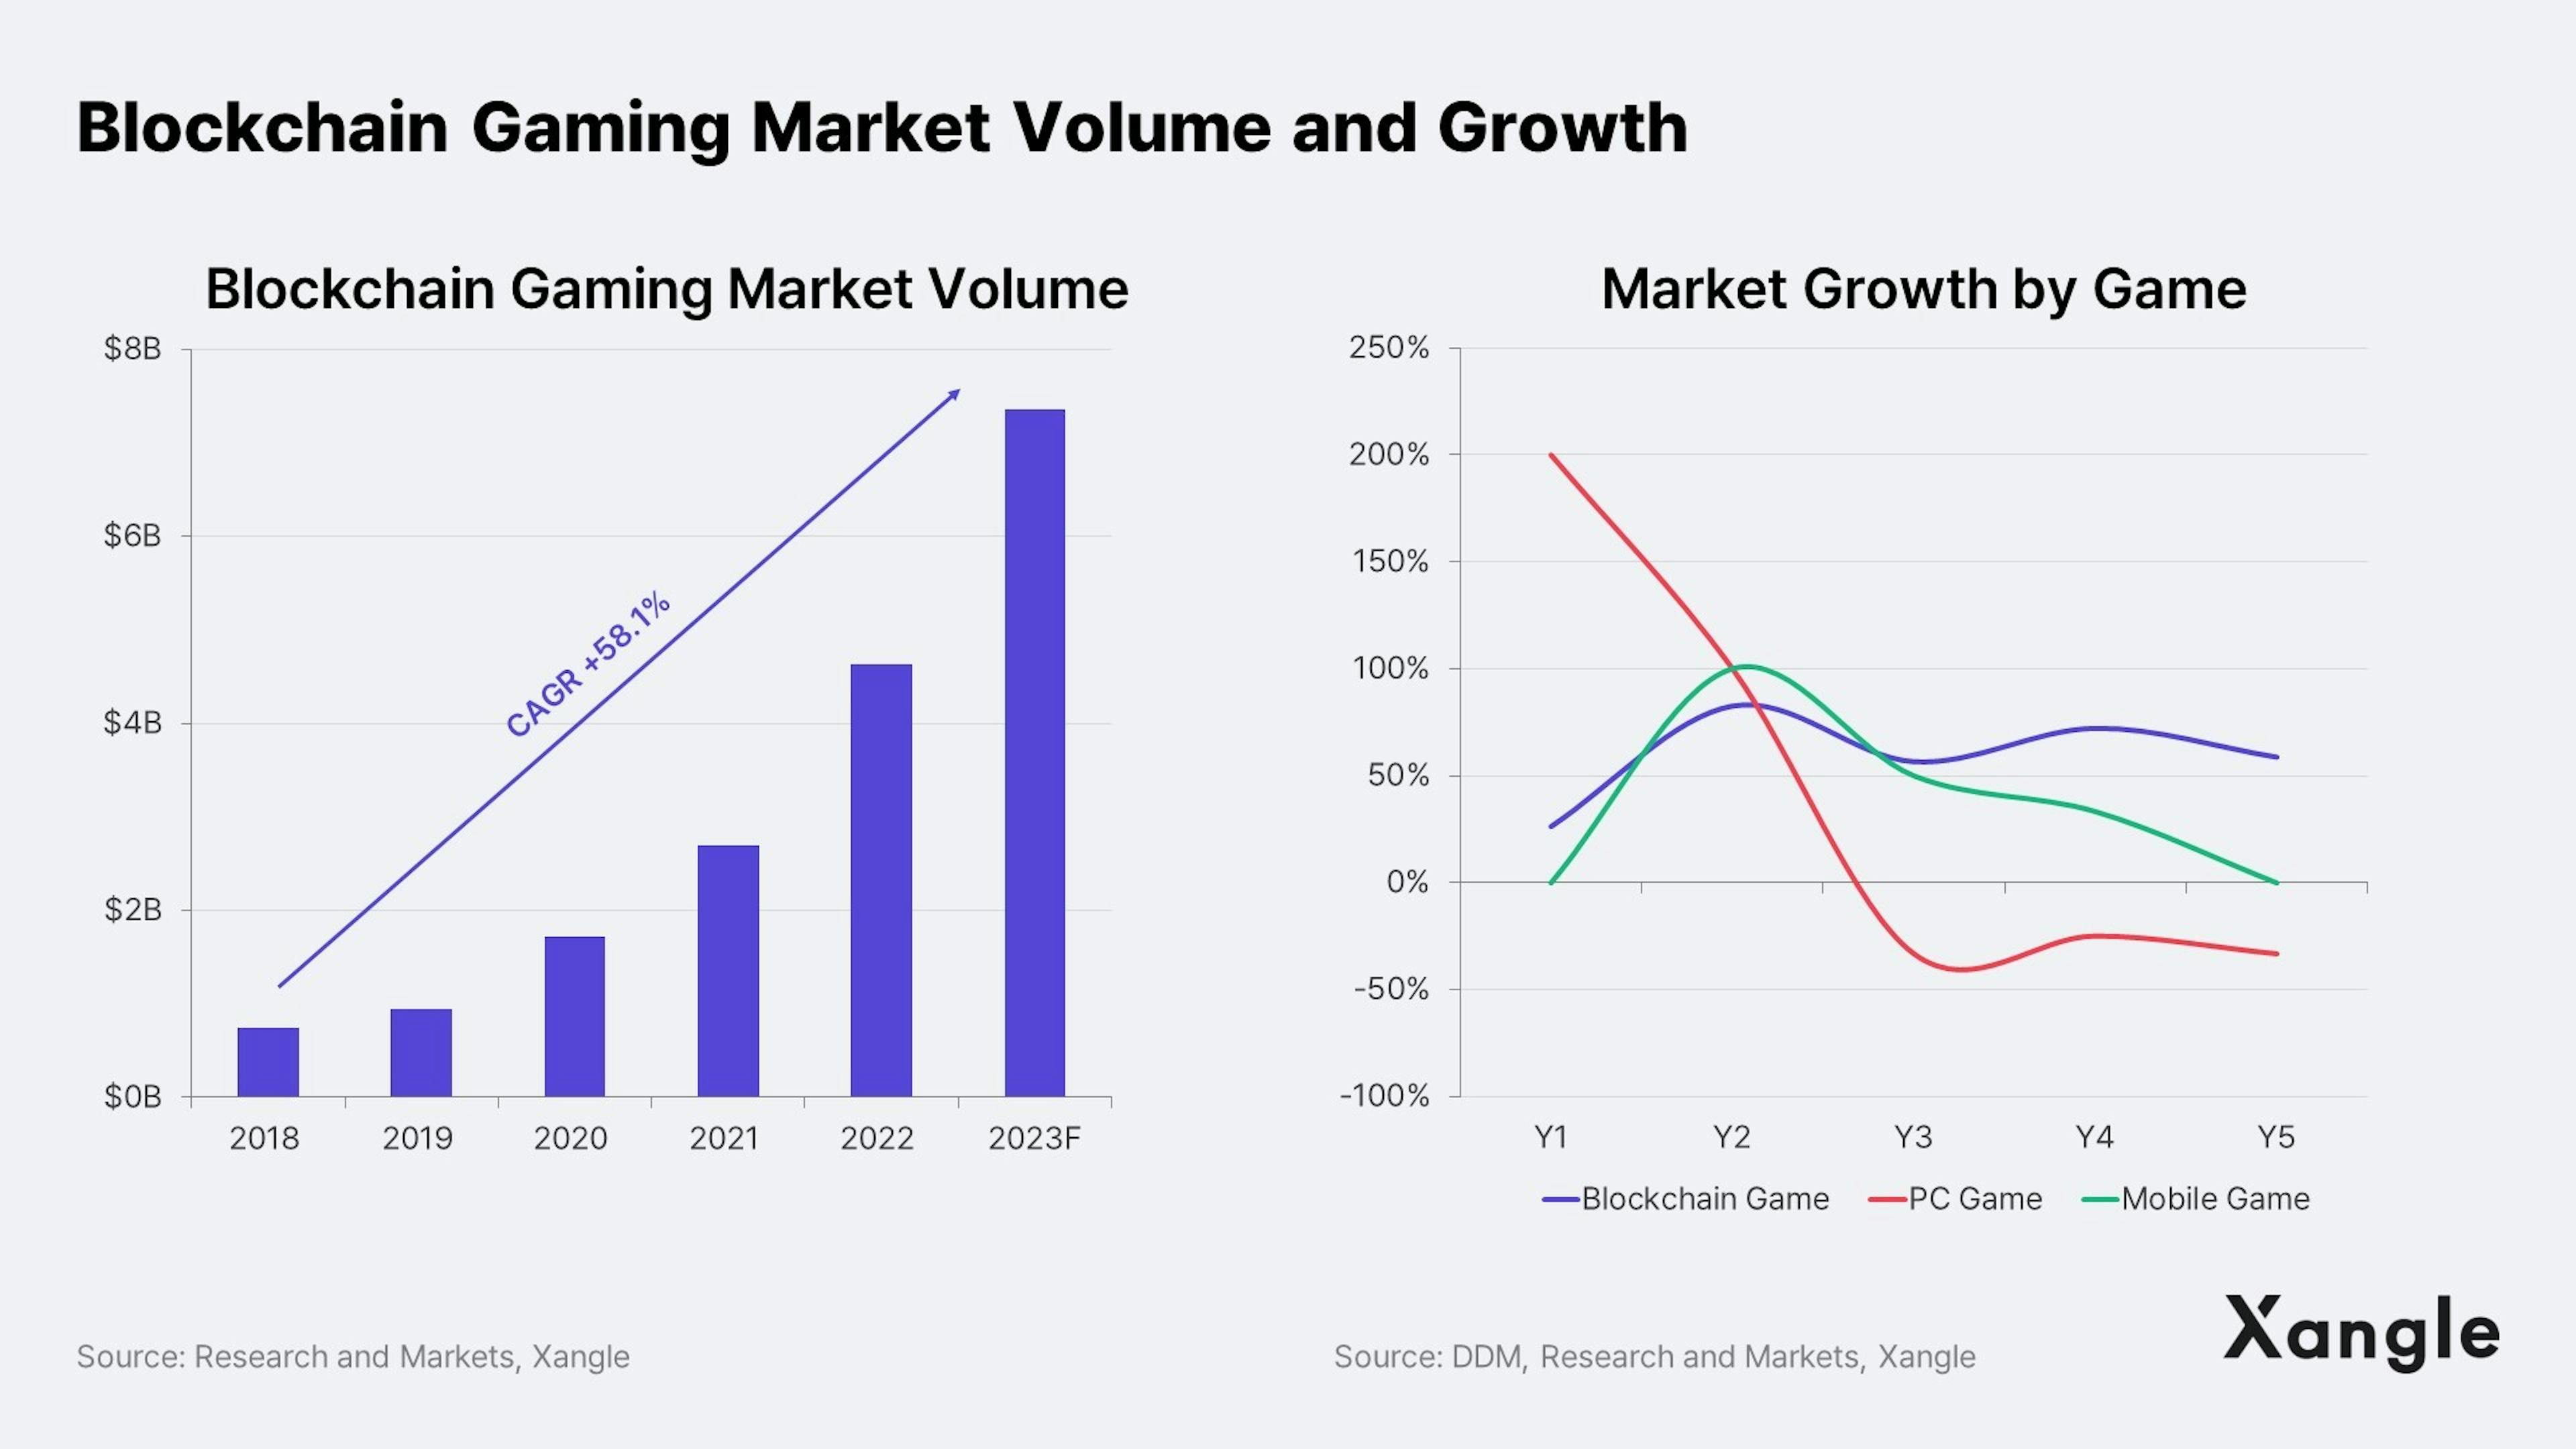 Blockchain gaming market volume and growth